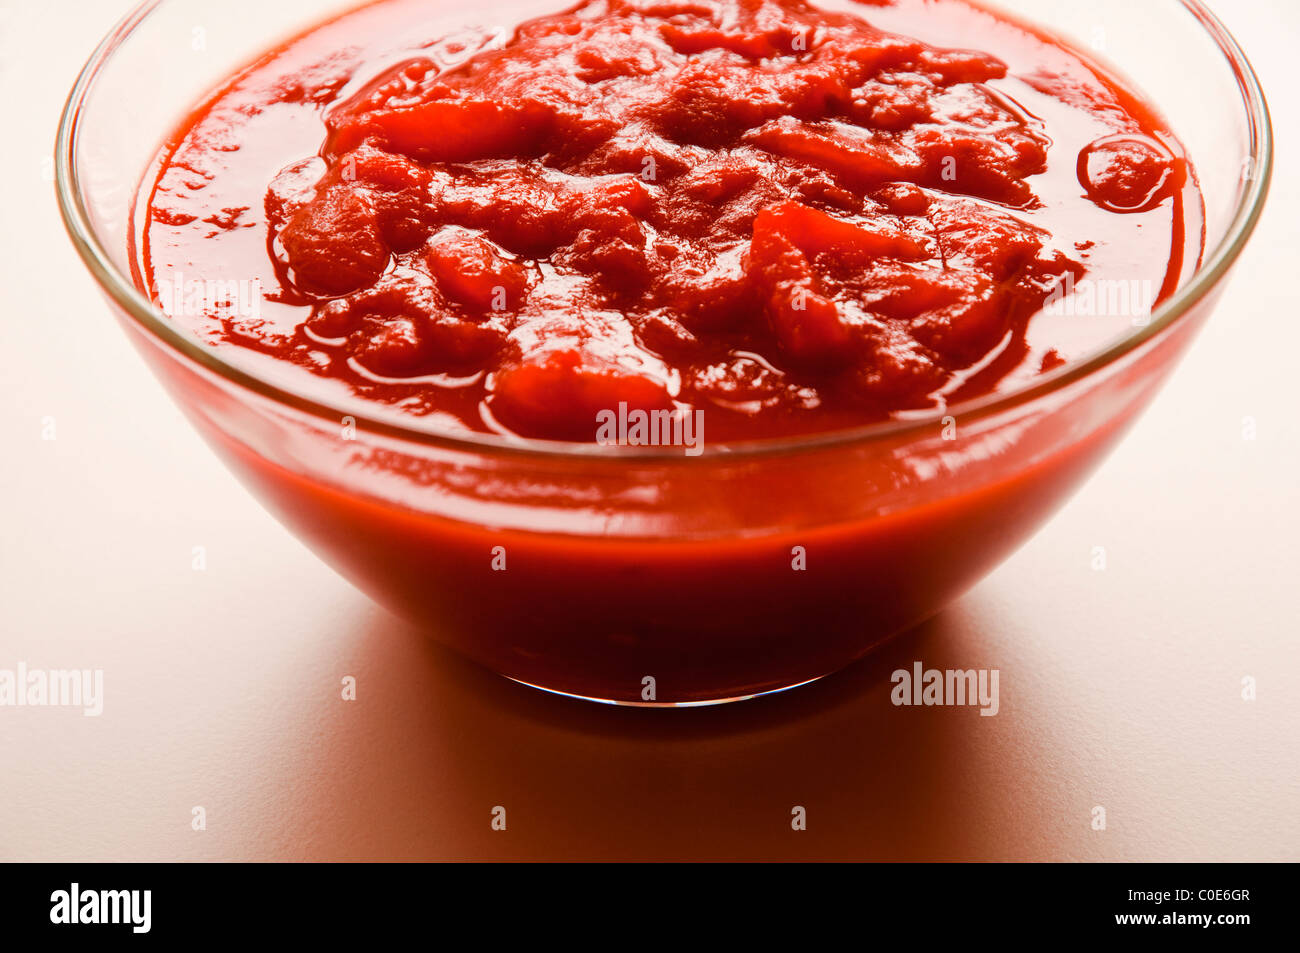 Chopped ( tinned ) tomatoes in a glass bowl. Stock Photo